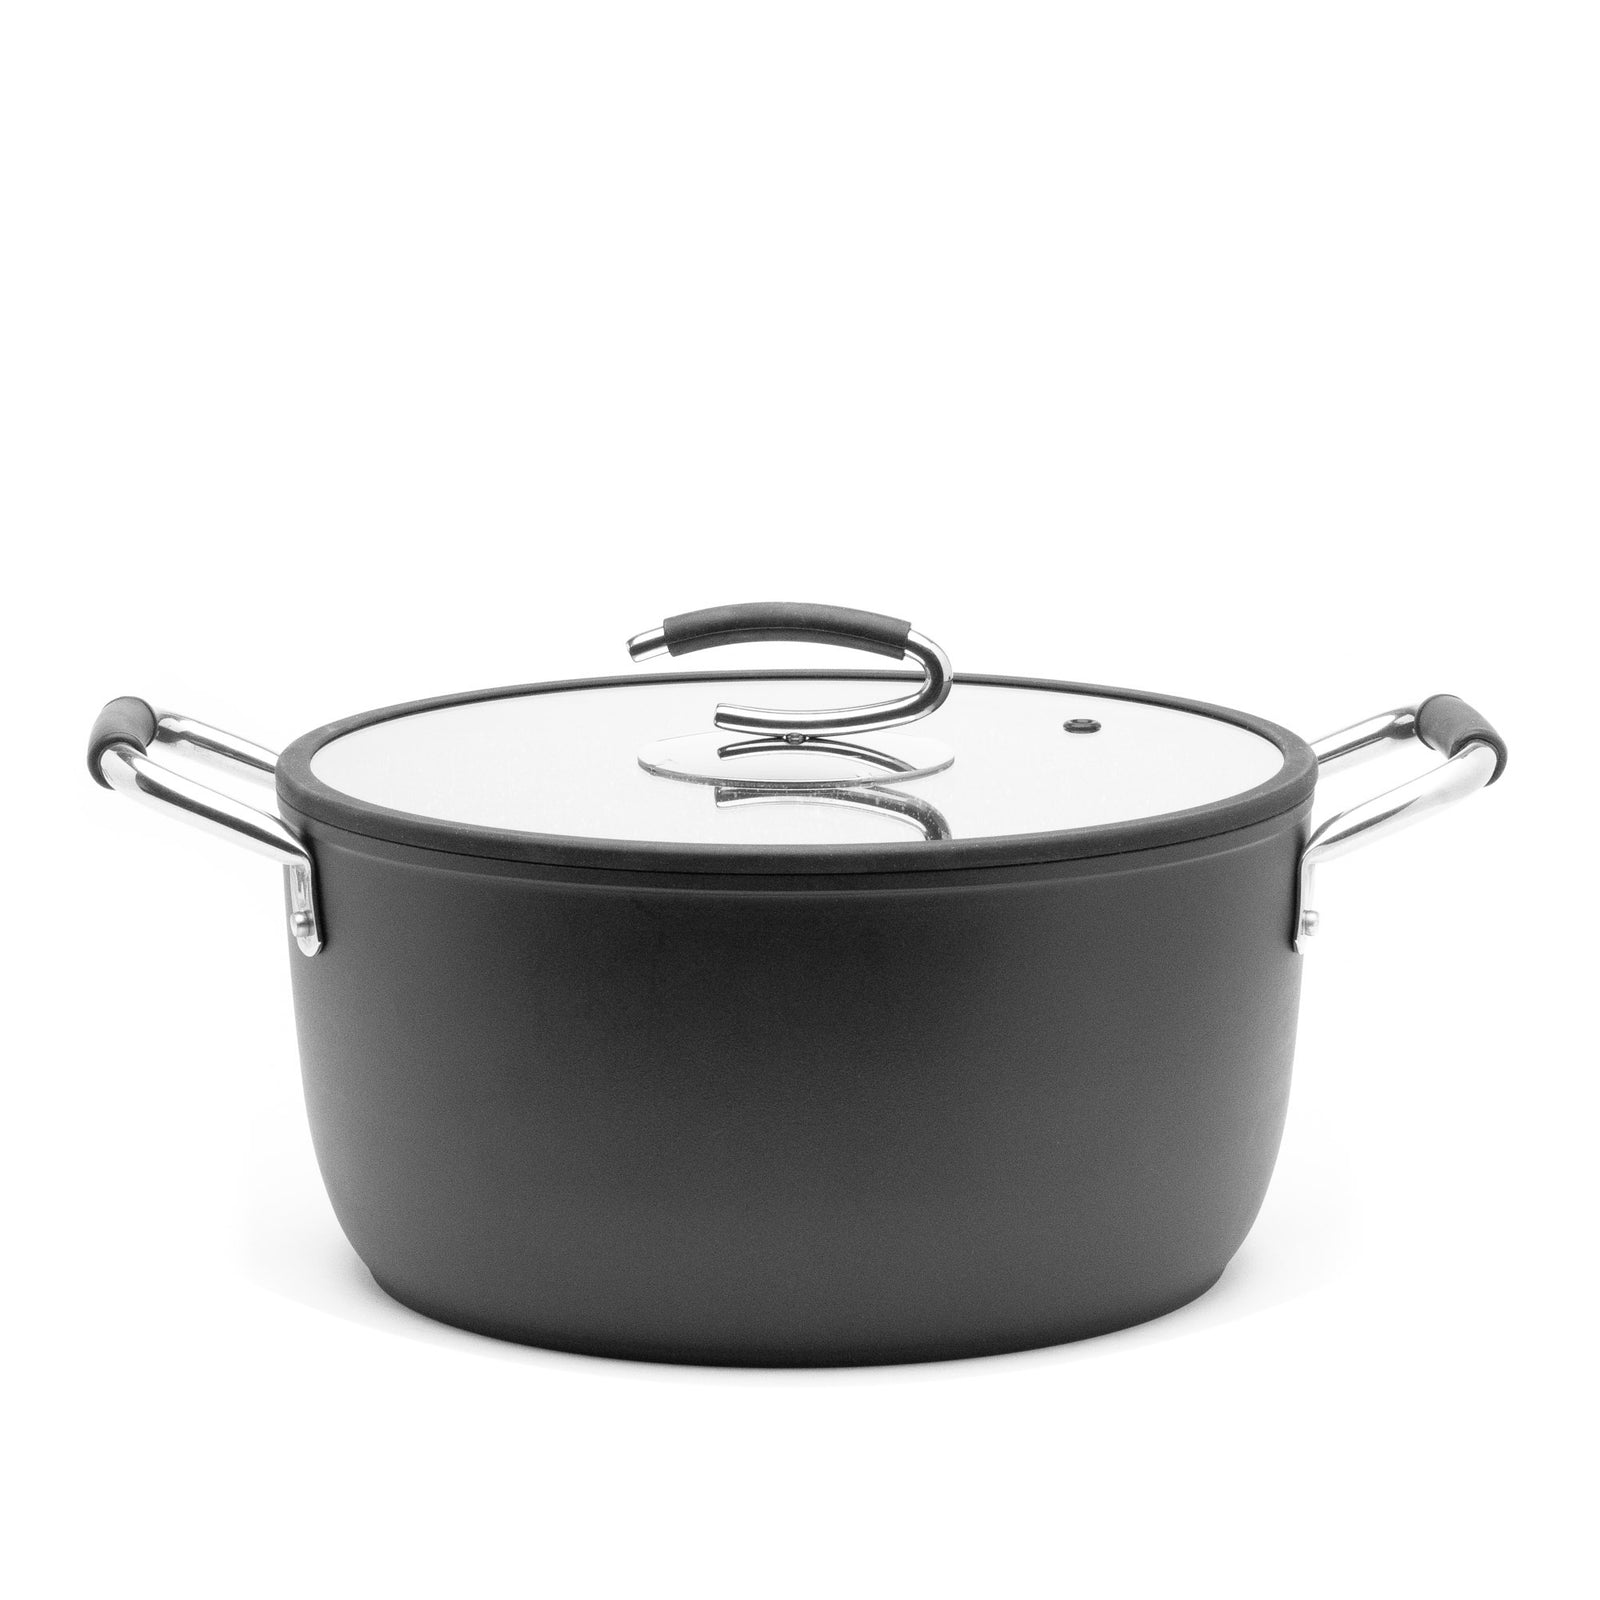 Professional 8 Quart Nonstick Dutch Oven with Glass Lid | Italian Made  Ceramic Coated Oven Safe Stock Pot for Bread Baking, Stews, Casseroles and  More